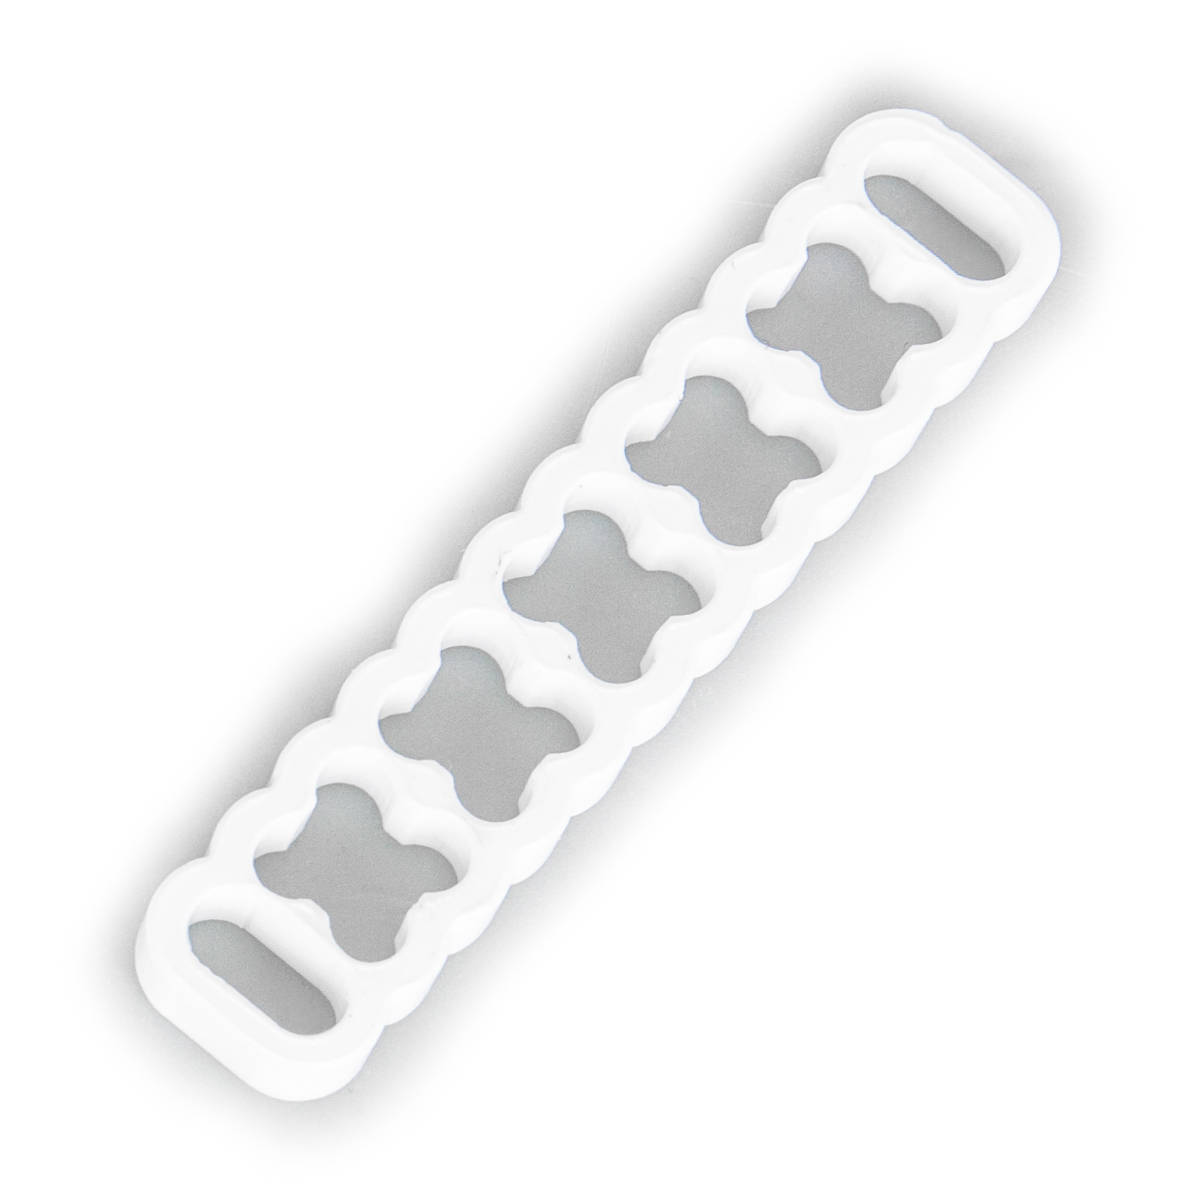 TechForge 24 Slot Stealth Cable Comb V2 - White